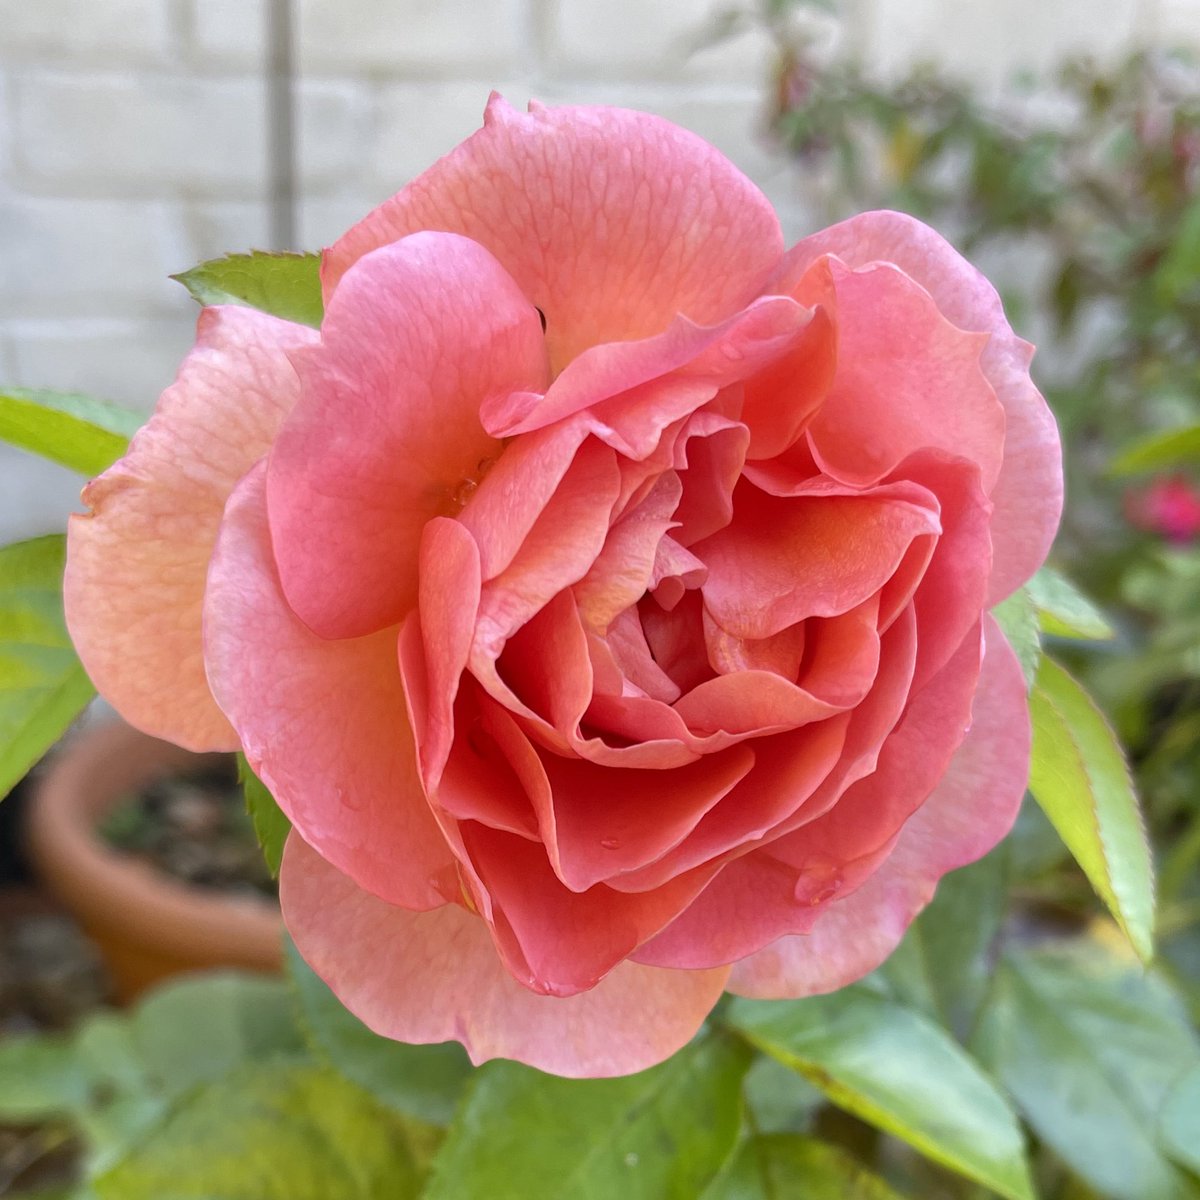 #CheeringUpMondays - ‘It’s A Wonderful Life’ - late October and still flowering. Rose of the Year 2022. #roses Have a good day everyone, take care #StaySafe #GardeningTwitter @loujnicholls @kgimson